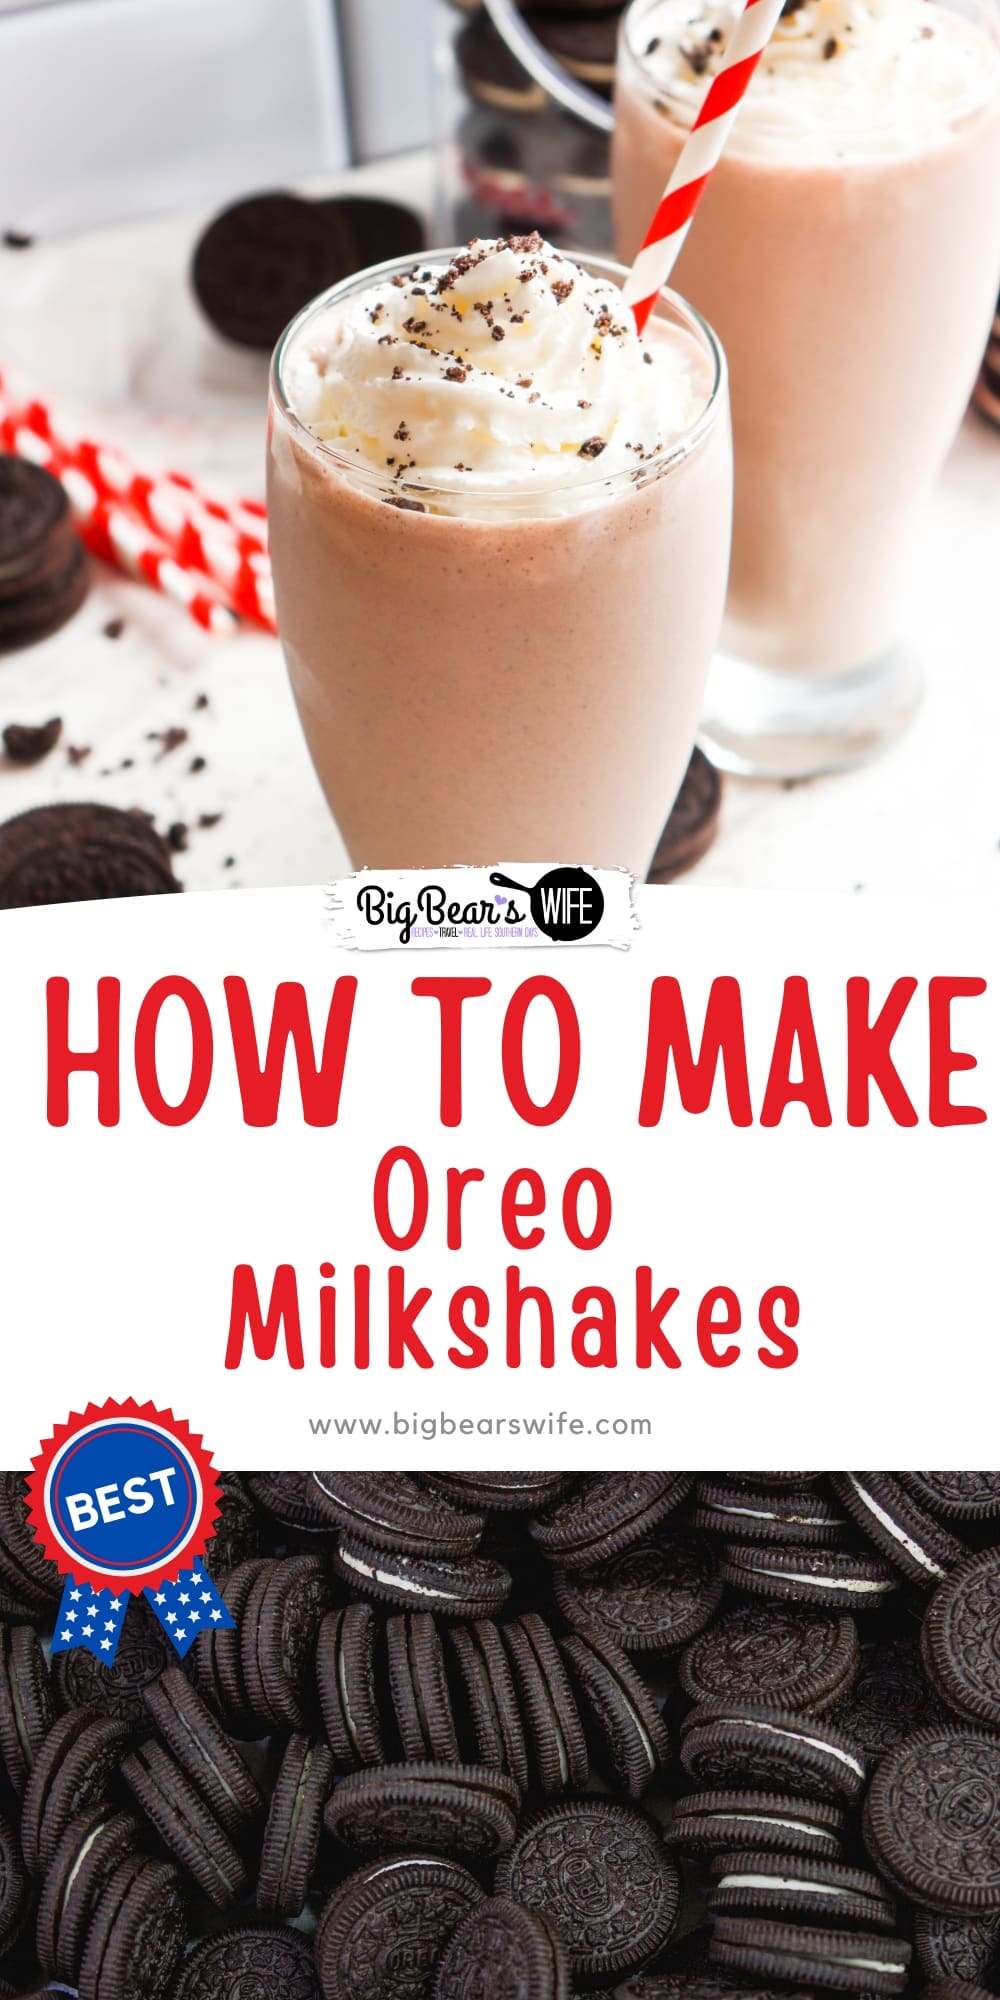 From old school diners to restaurants all over, the OREO milkshake has become a classic favorite of young and old alike! Combine your favorite chocolate sandwich cookies and vanilla ice cream for the perfect homemade milkshake! via @bigbearswife